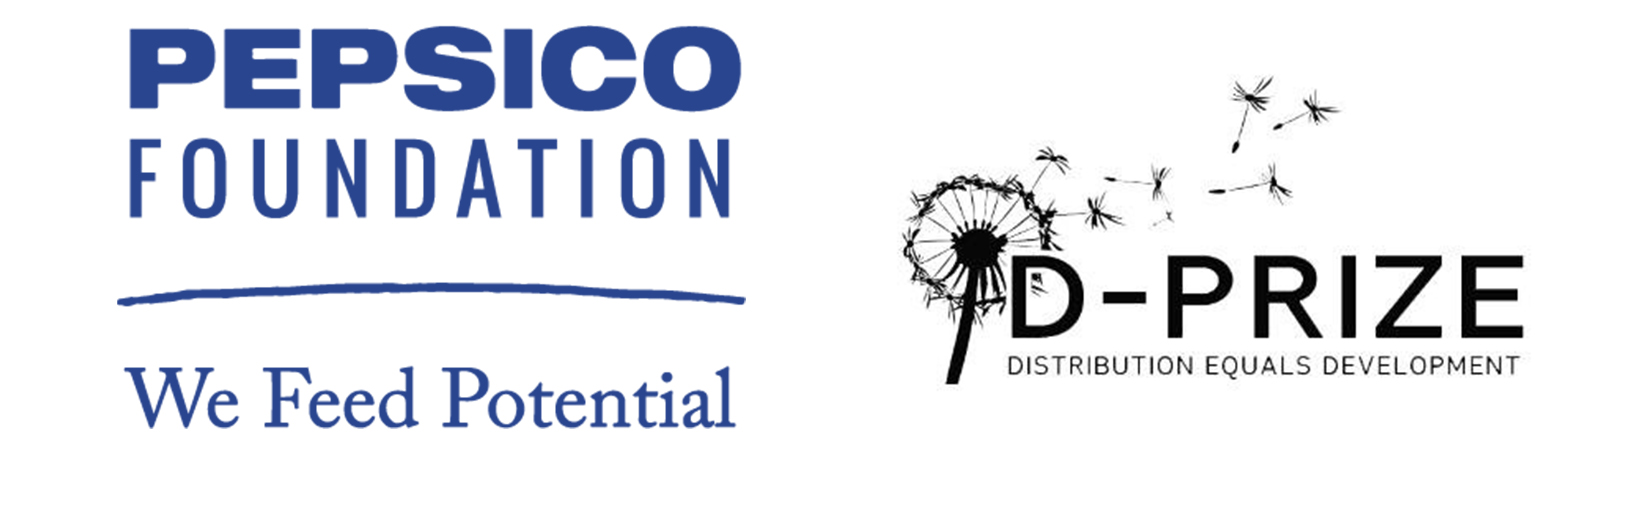 Logo for two organizations Pepsico Foundation and D-Prize 